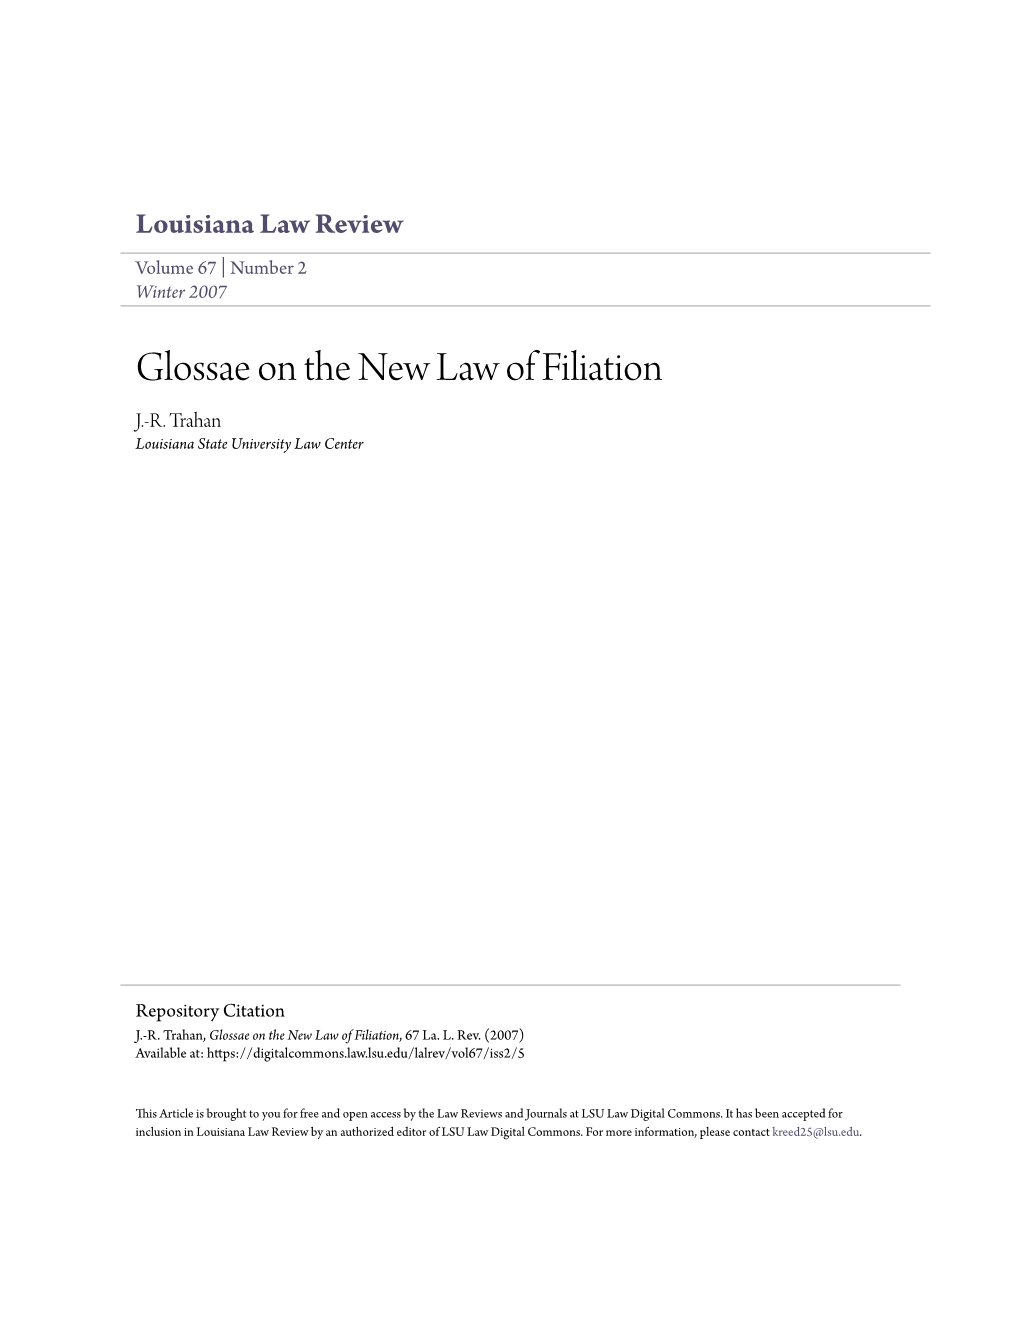 Glossae on the New Law of Filiation J.-R